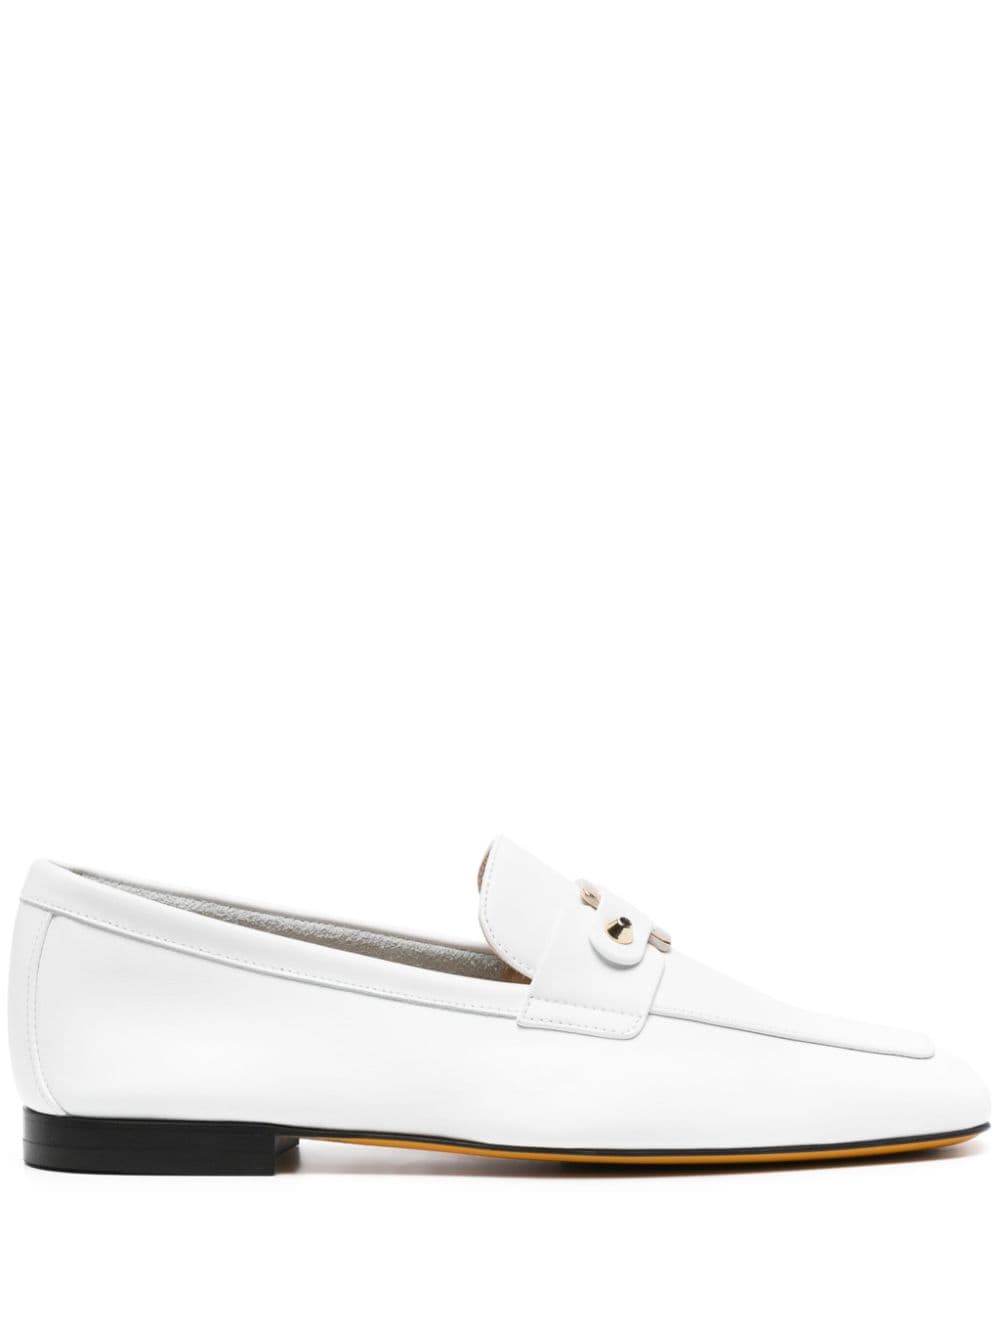 Doucal's buckle-detailed leather loafers - White von Doucal's